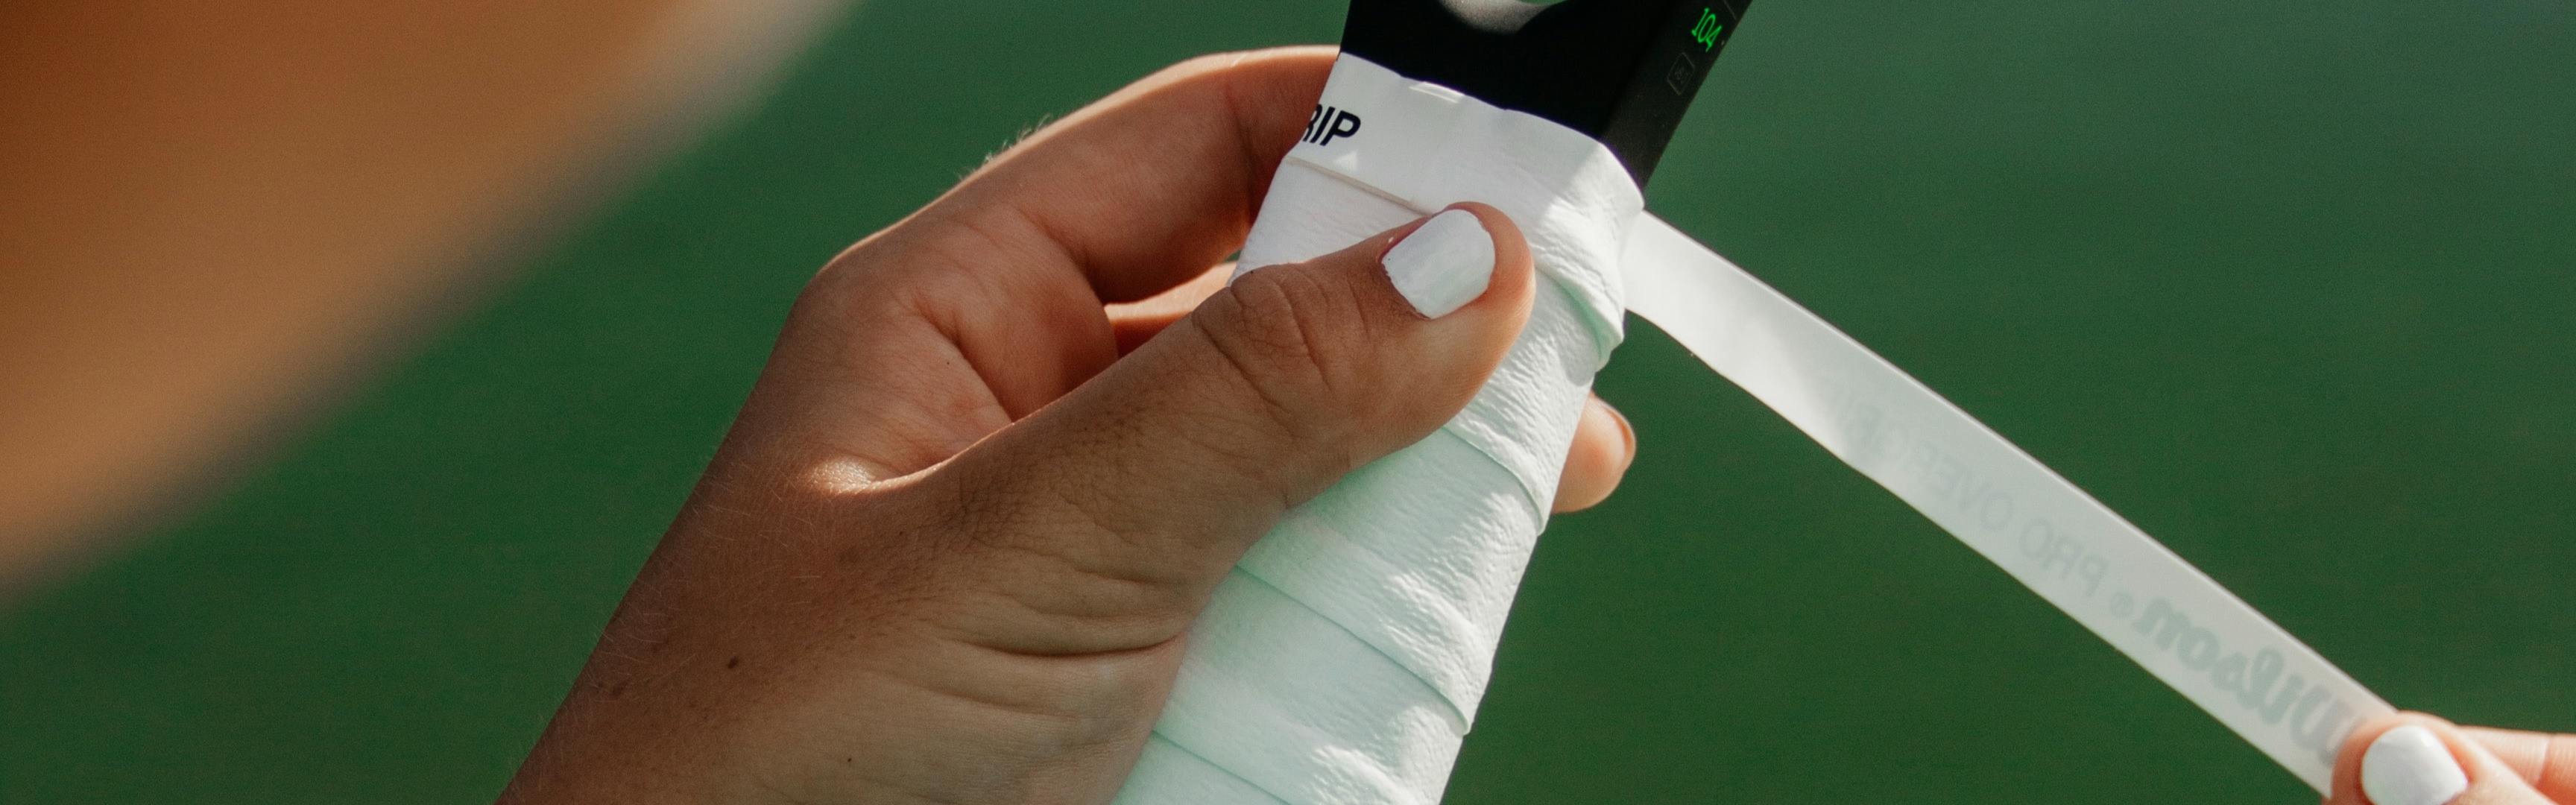 systeem Staat methodologie Tennis Racket Grip: How to Hold for Your Racket | Curated.com